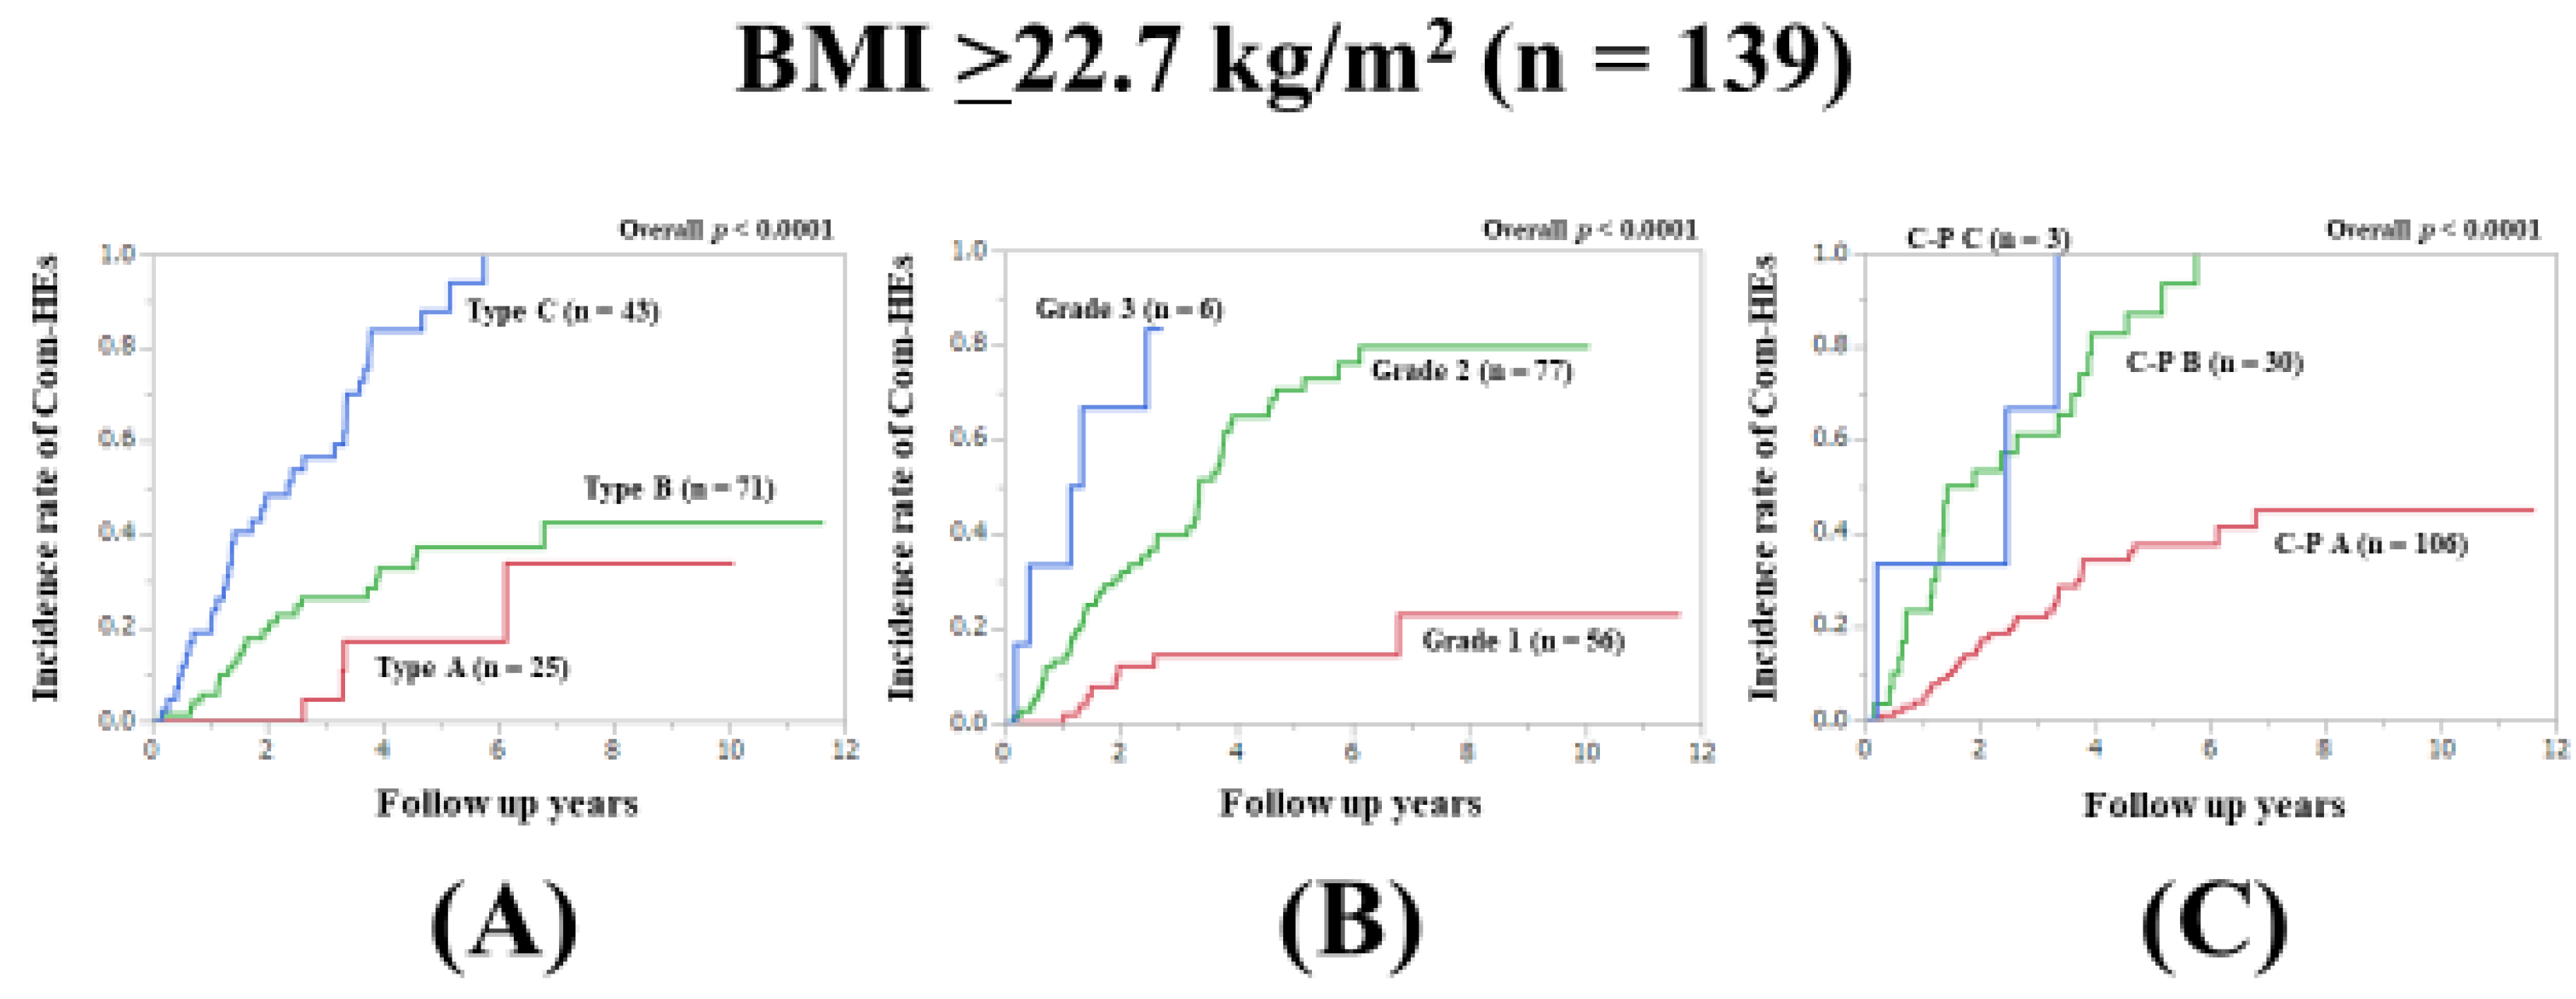 Jcm Free Full Text Serum Zinc Level Grading System A Useful Model For Composite Hepatic Events In Hepatitis C Virus Associated Liver Cirrhosis Html